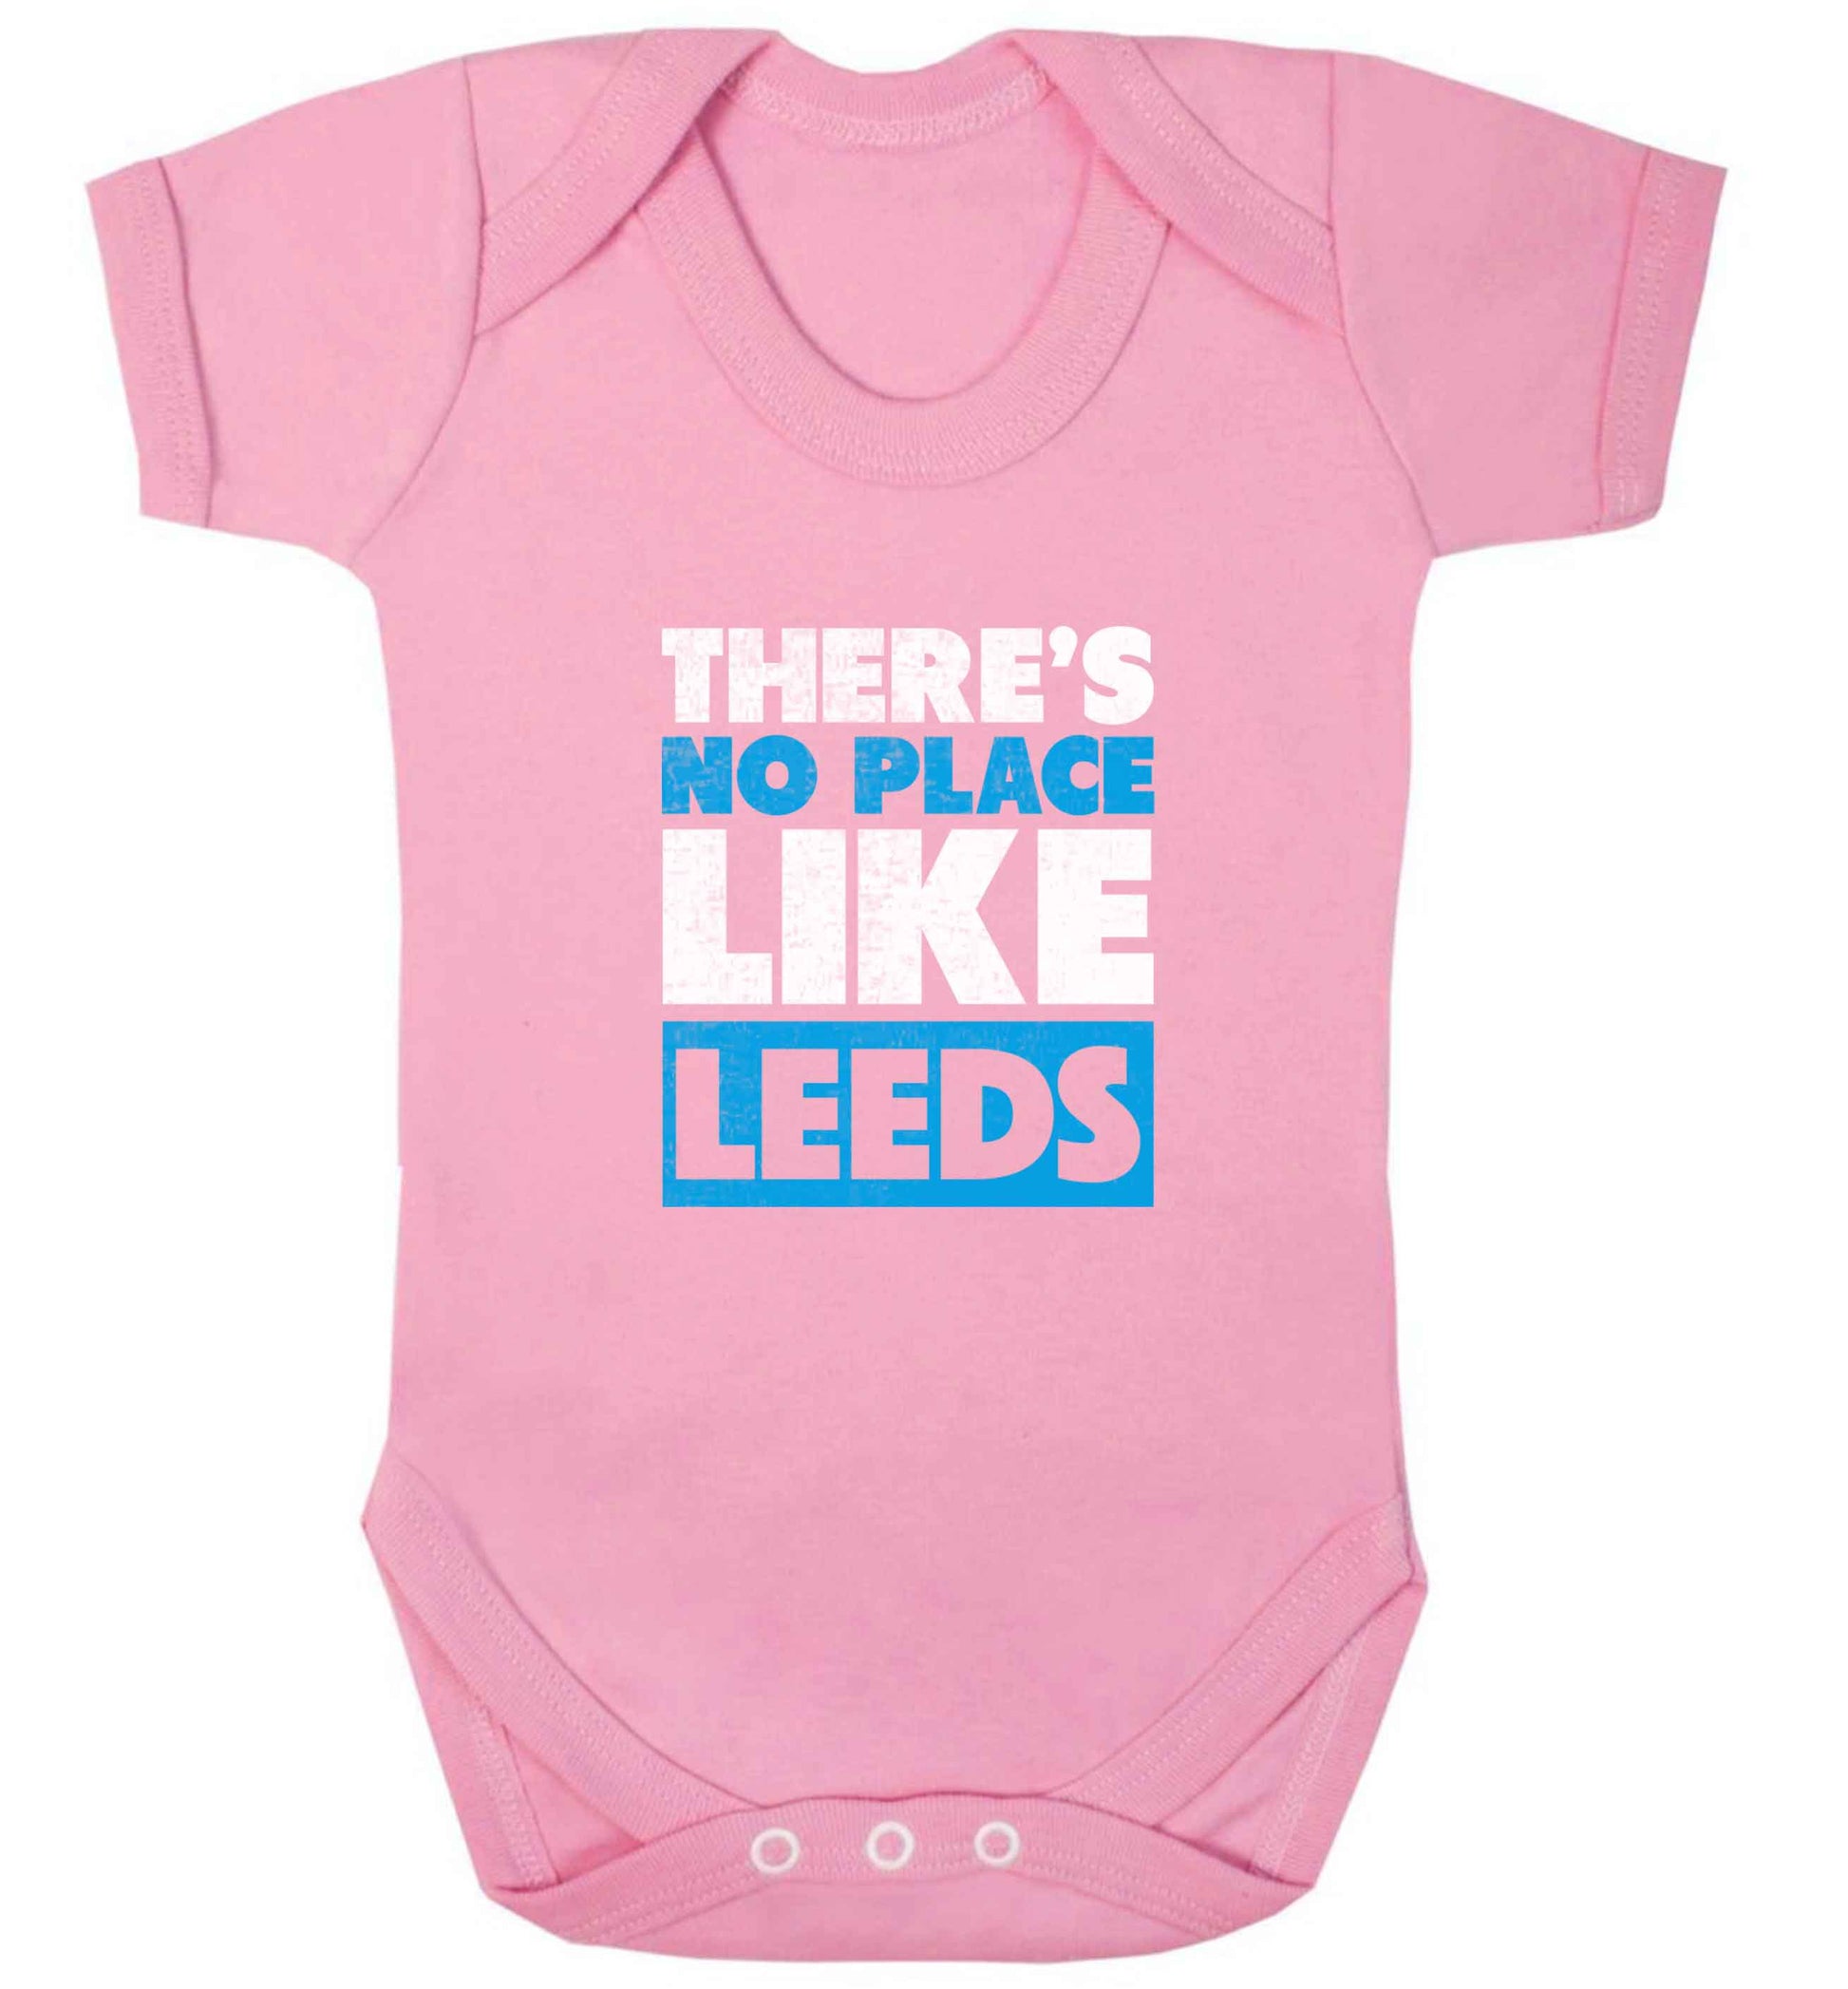 There's no place like Leeds baby vest pale pink 18-24 months